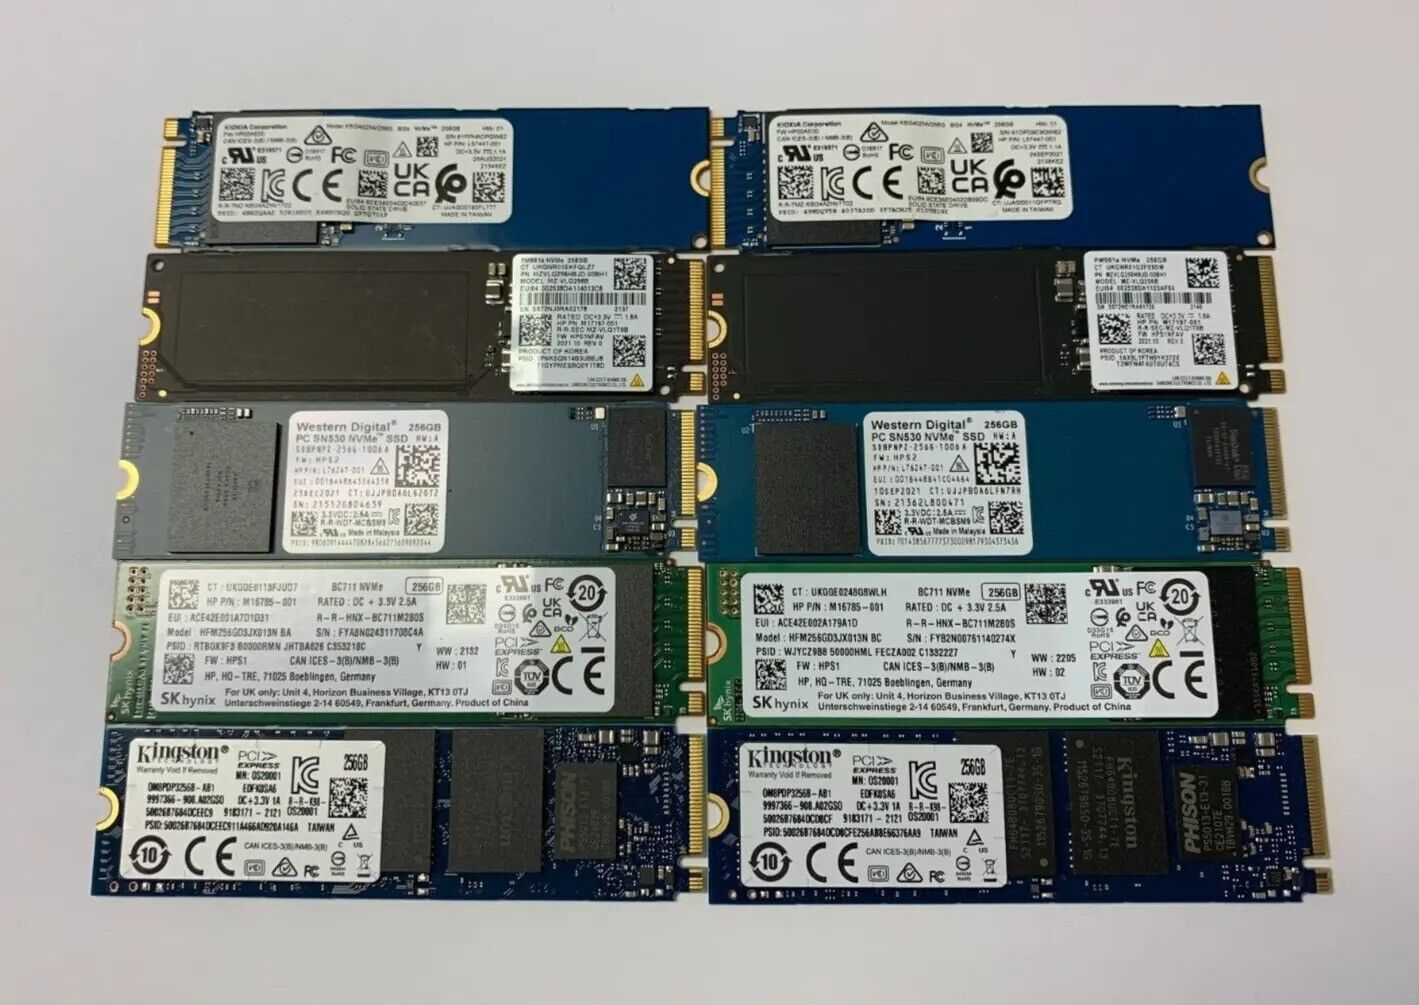 LOT OF 10 - OEM Mixed Brand 256GB M.2 2280 NVMe Internal Solid State Drives SSDs